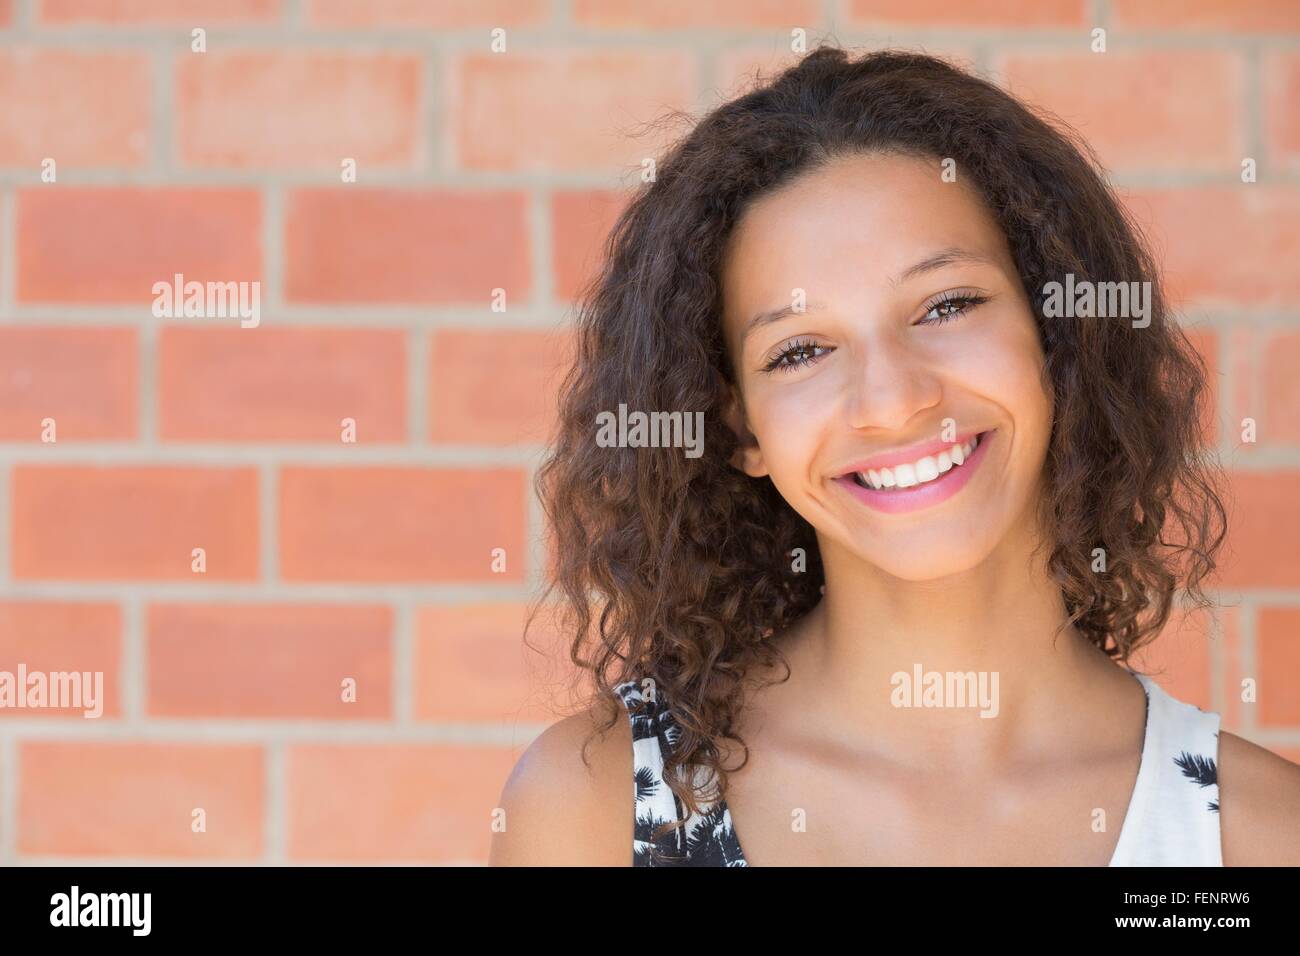 Portrait of happy girl in front of brick wall Stock Photo